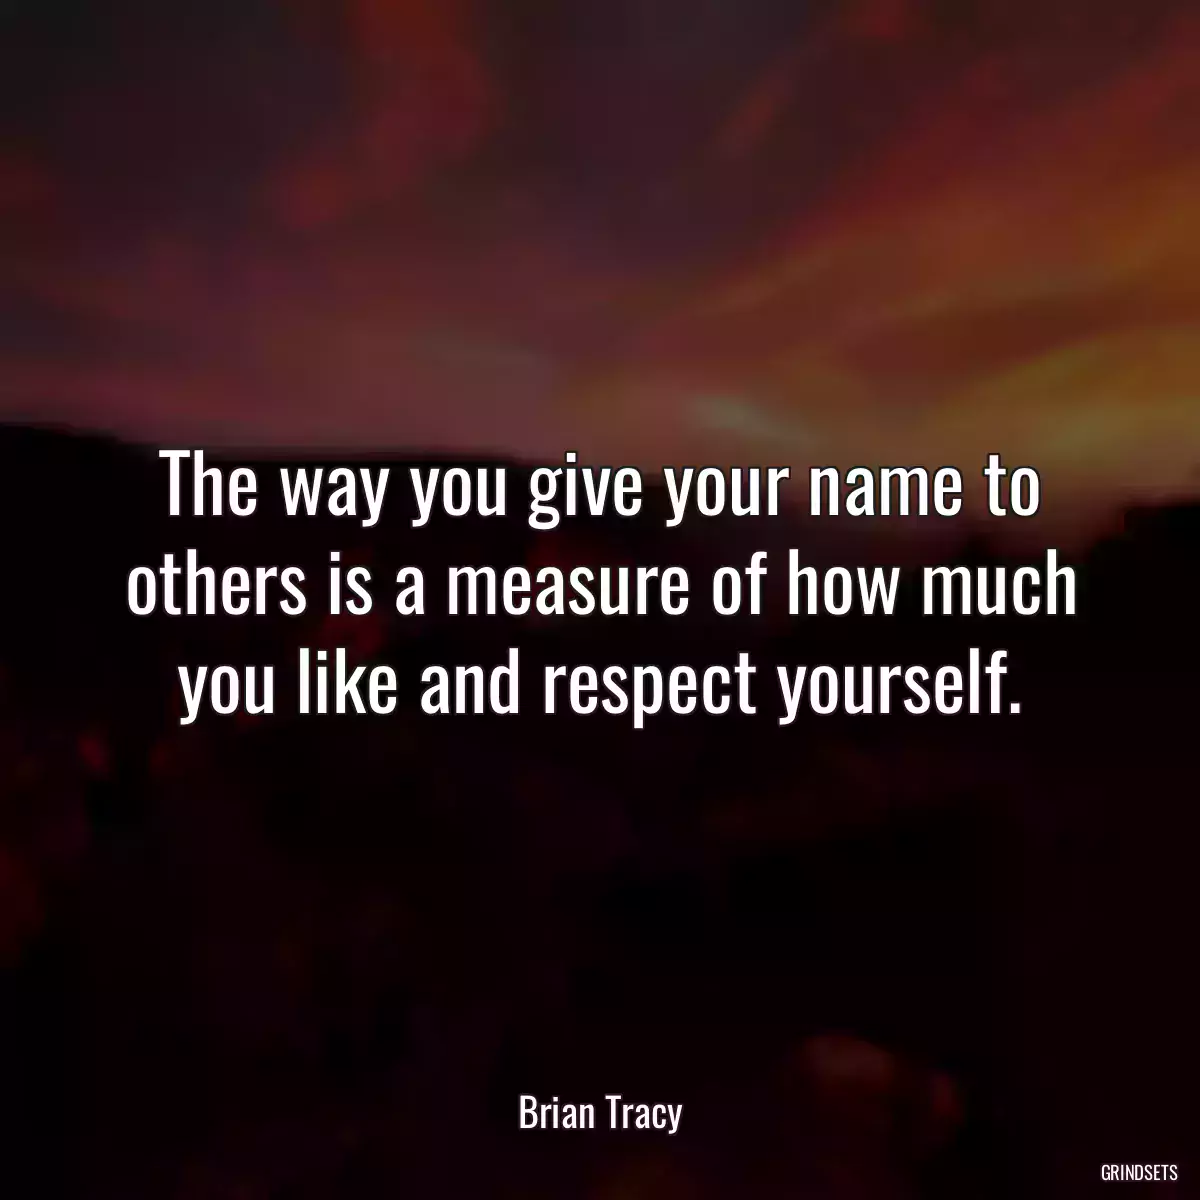 The way you give your name to others is a measure of how much you like and respect yourself.